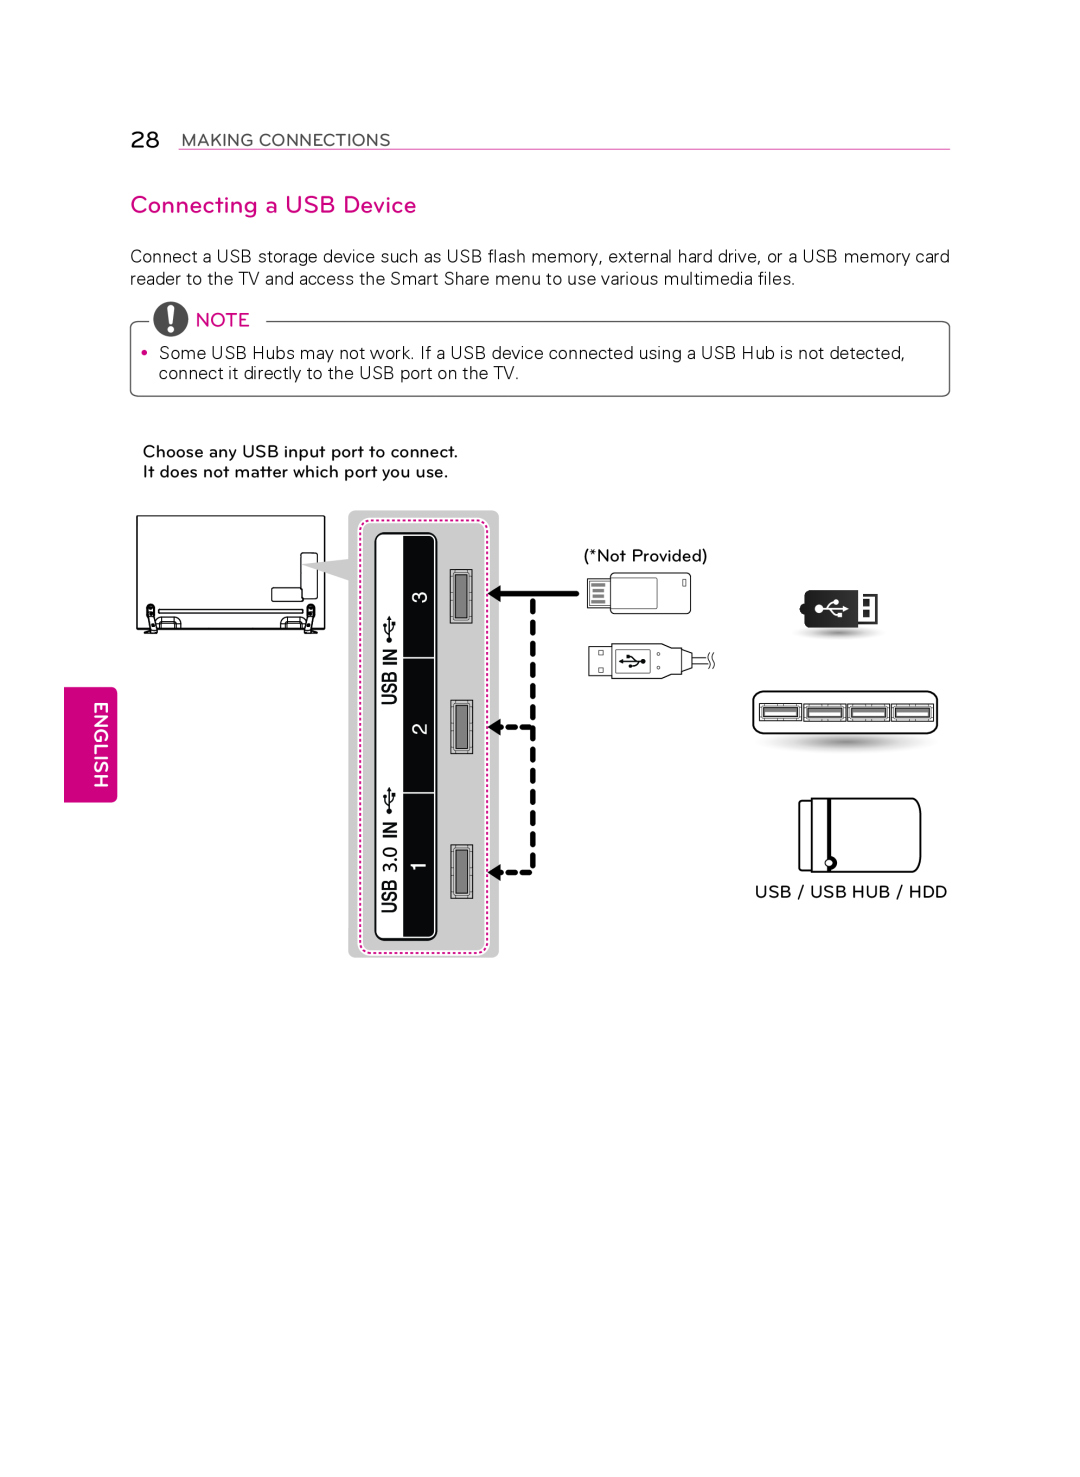 LG Electronics 55LA9650 owner manual Connecting a USB Device, English, Making Connections 